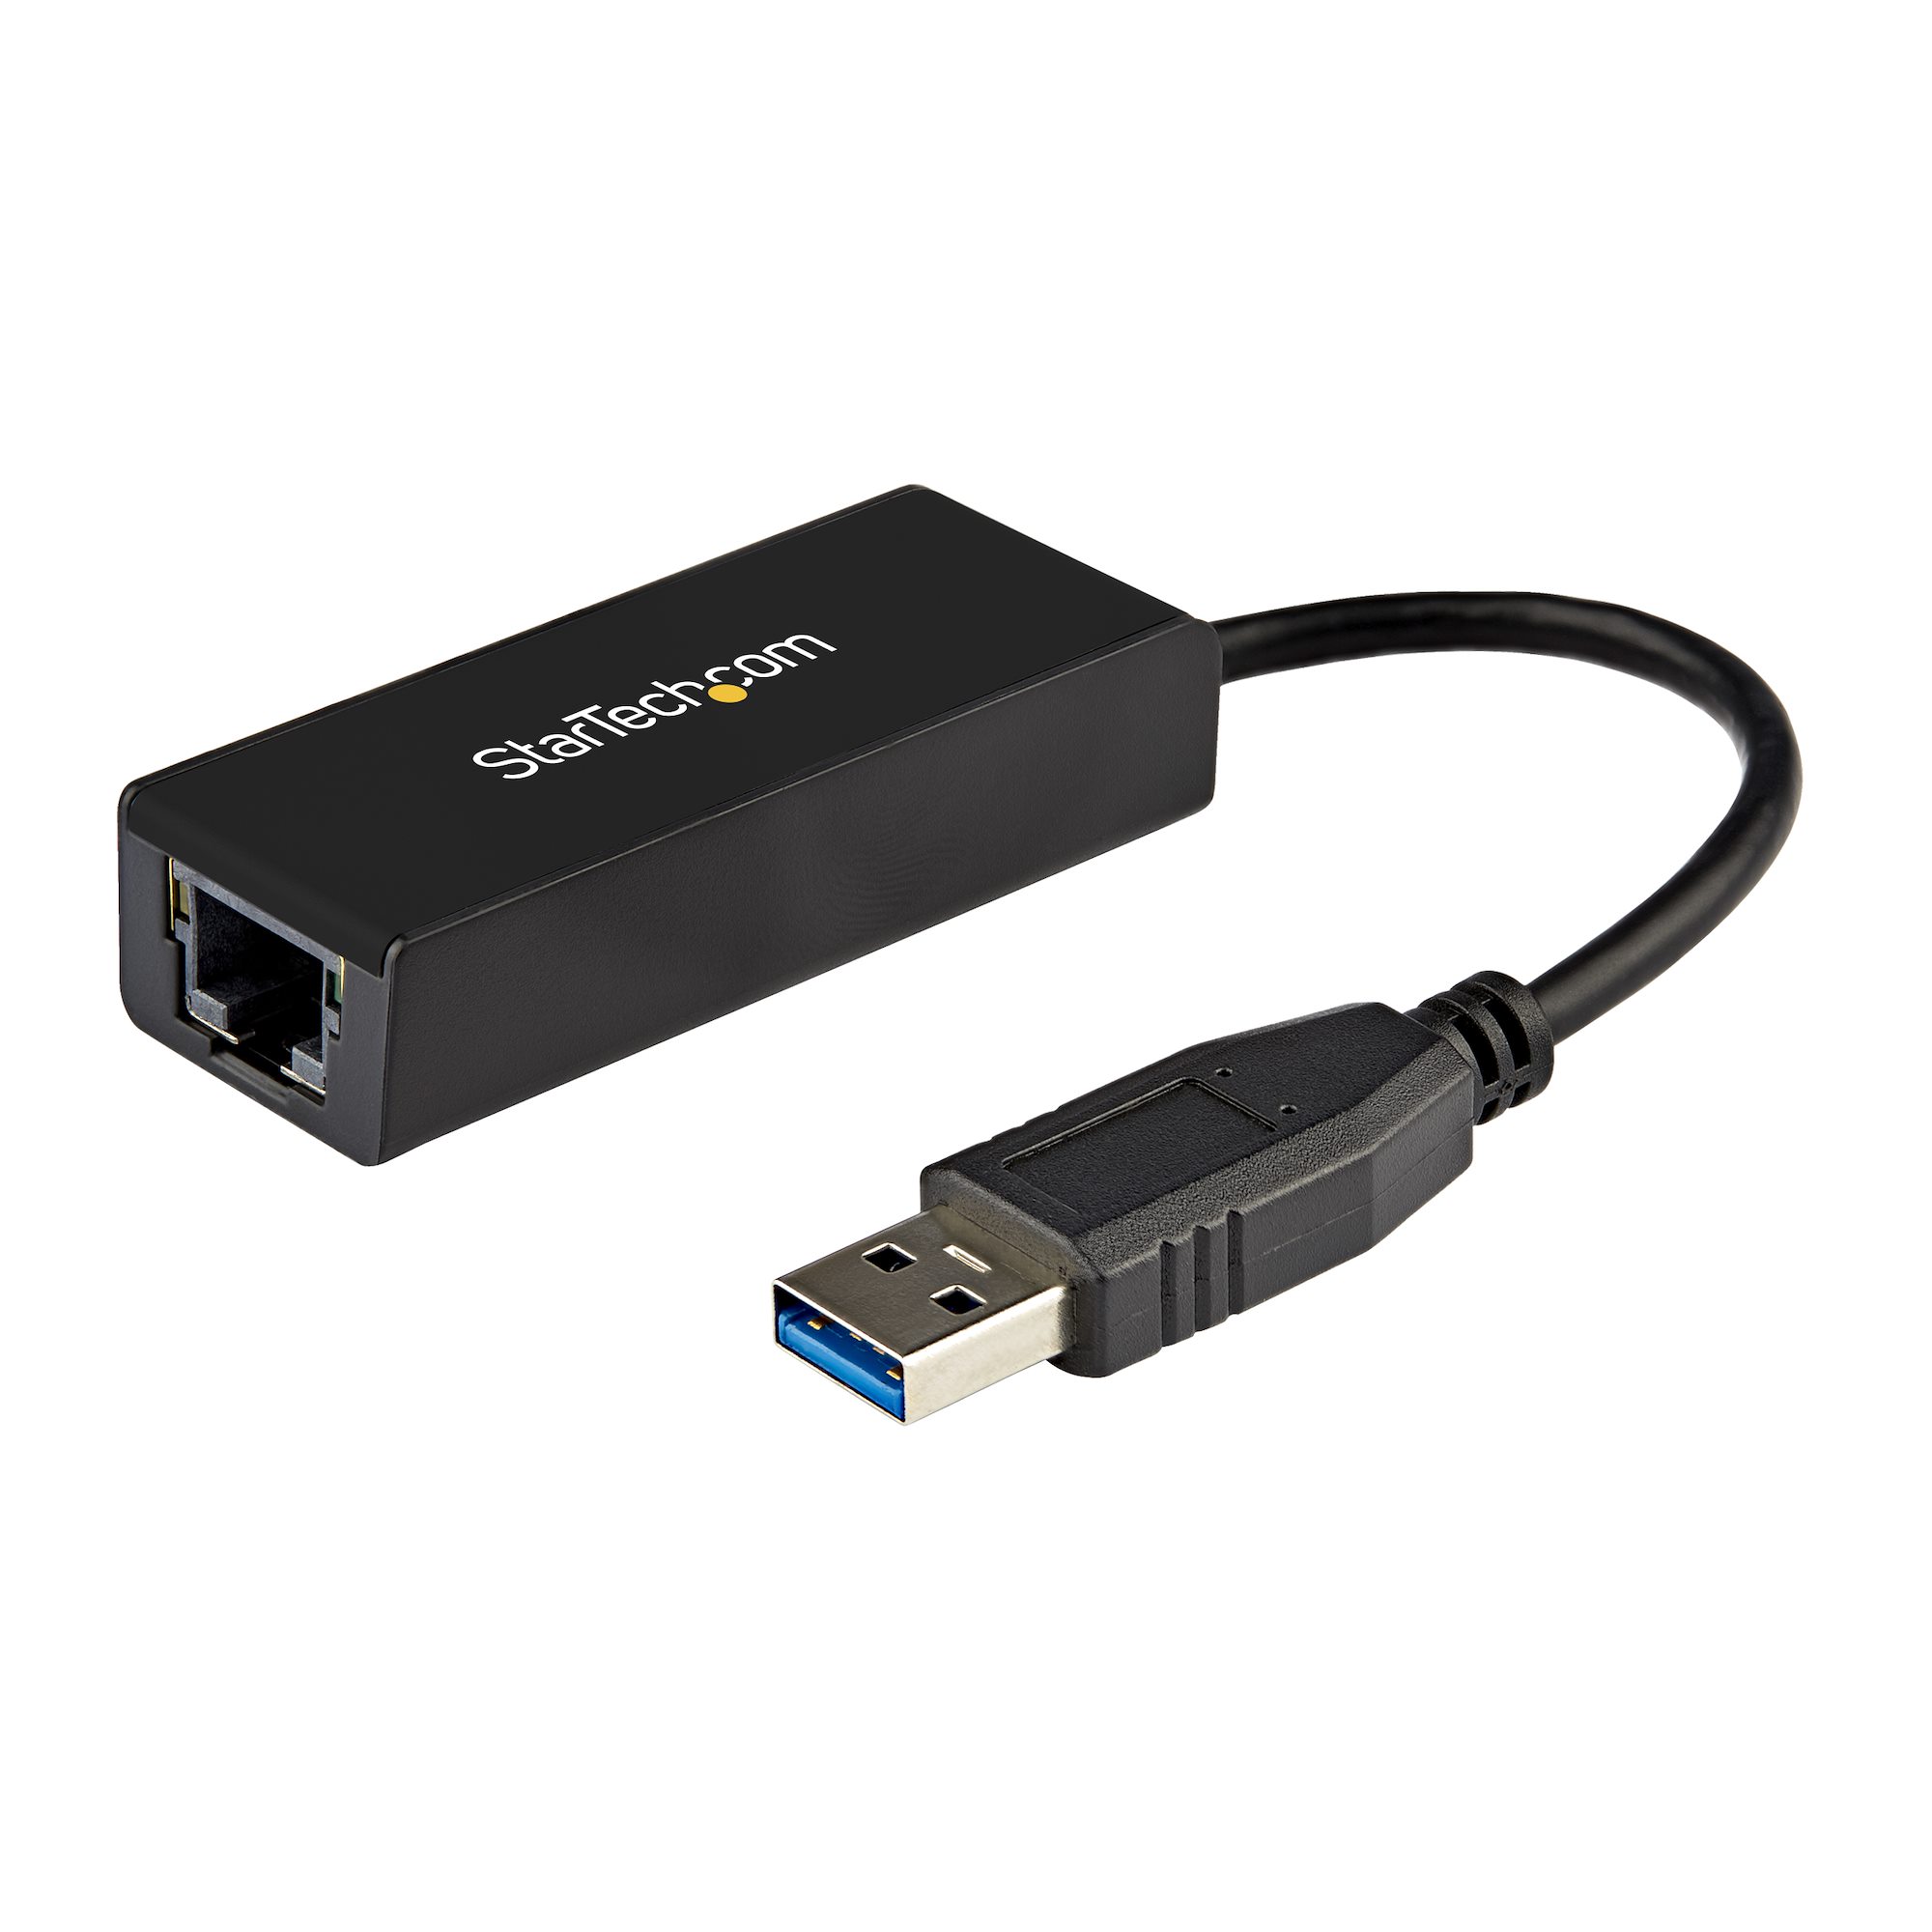 Rendition skull irony USB 3.0 to Gigabit Ethernet Adapter RJ45 - USB and Thunderbolt Network  Adapters | StarTech.com